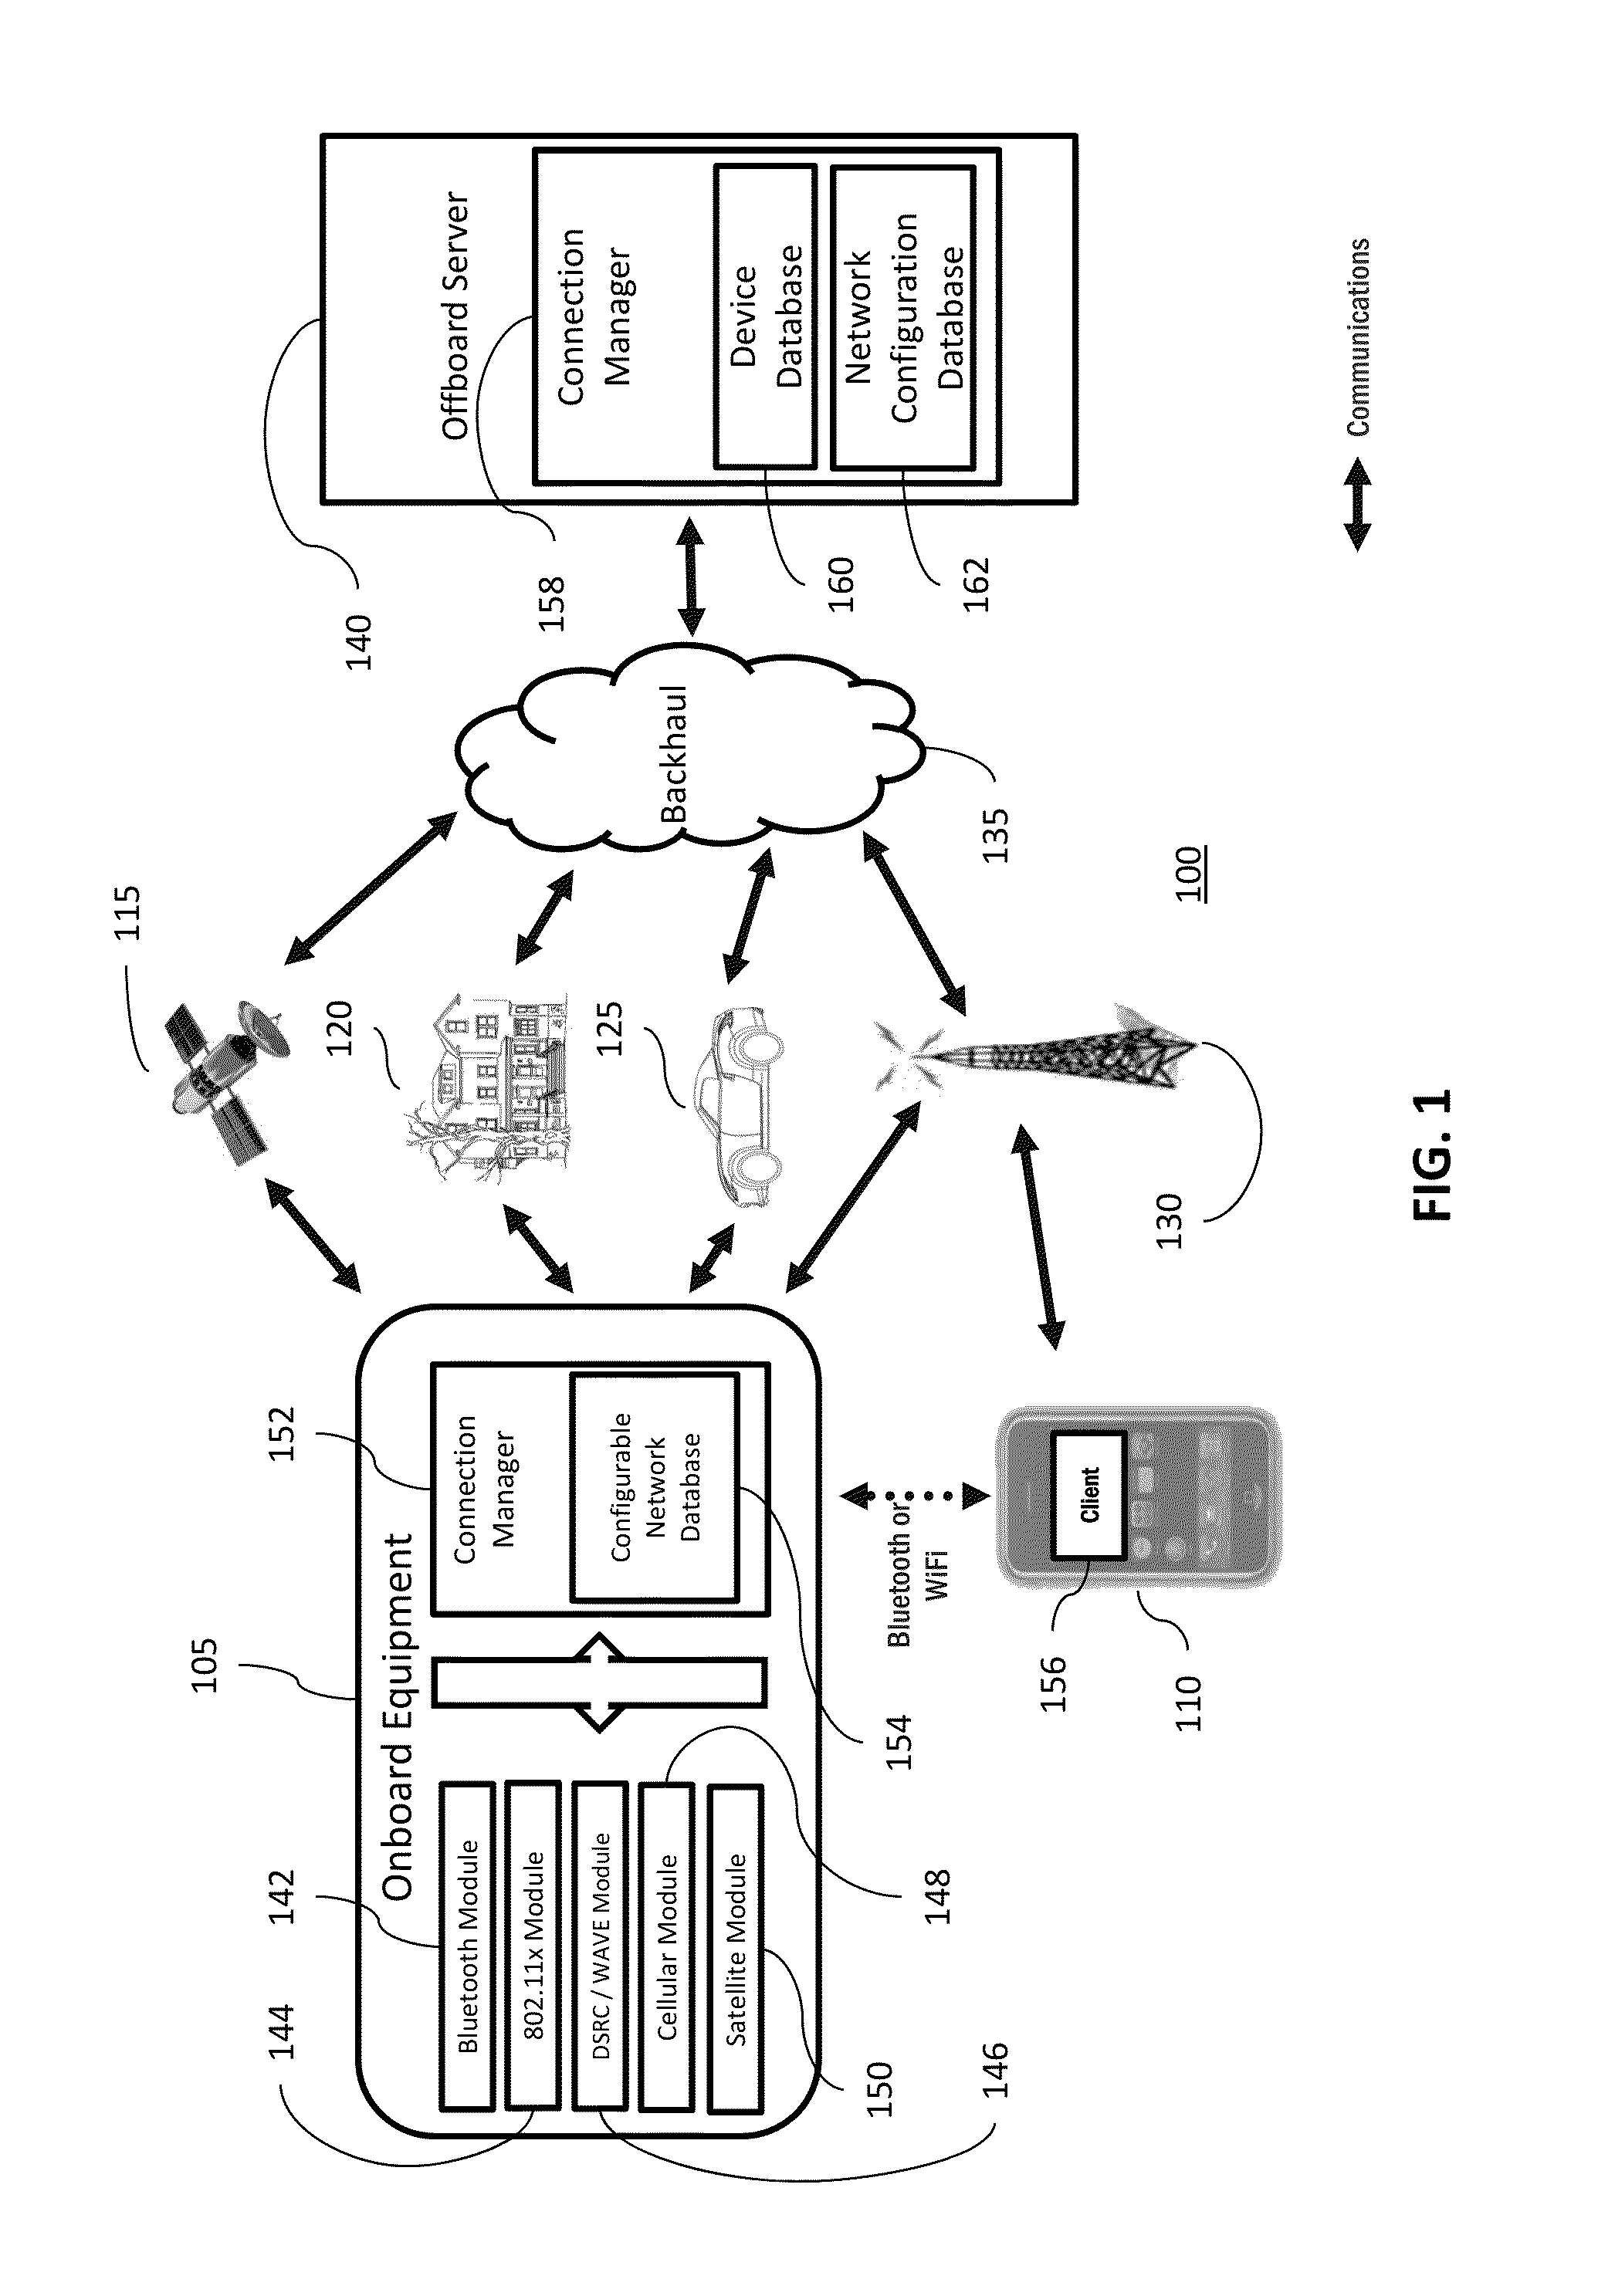 Method and system for providing configurable communication network routing